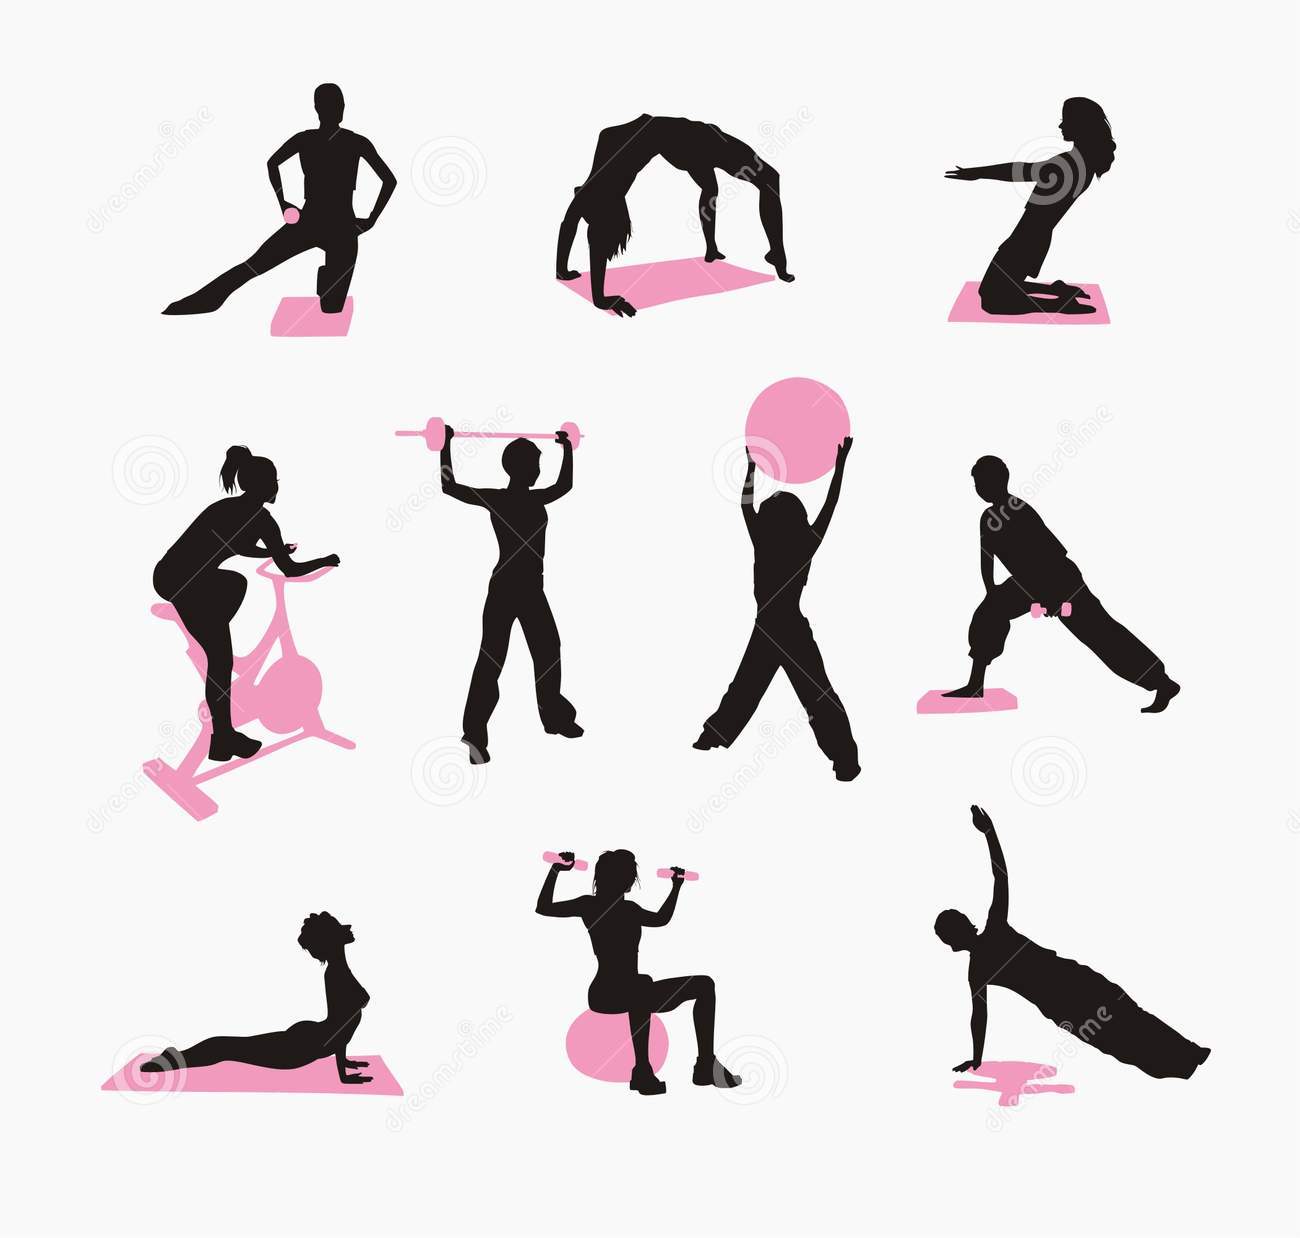 Free Gym Workout Cliparts, Download Free Clip Art, Free Clip